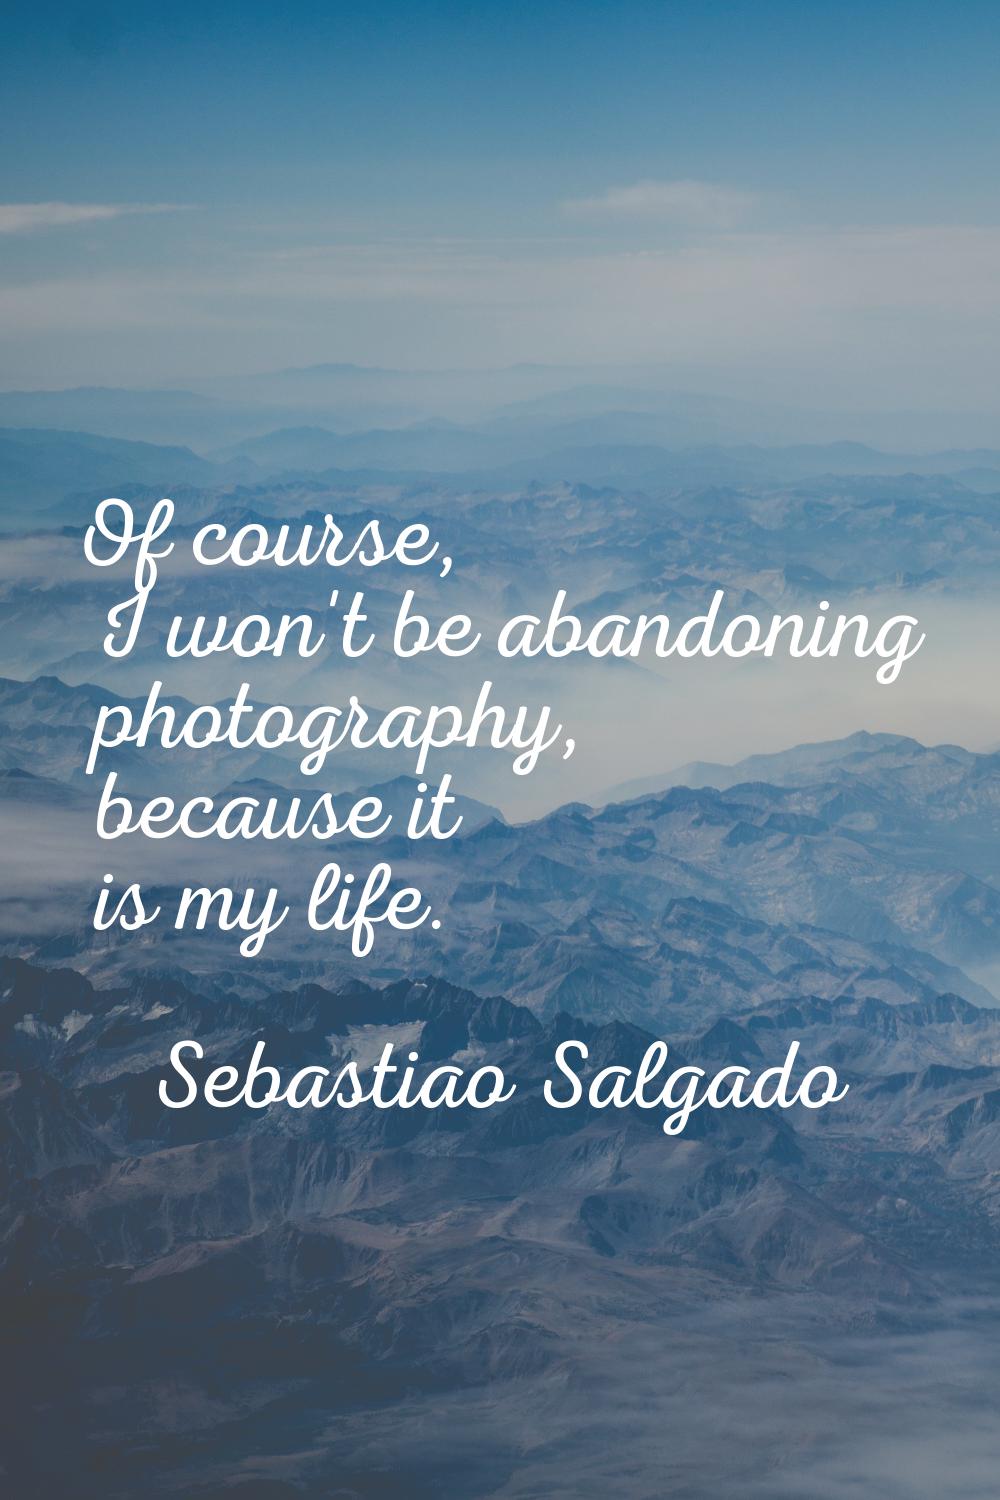 Of course, I won't be abandoning photography, because it is my life.